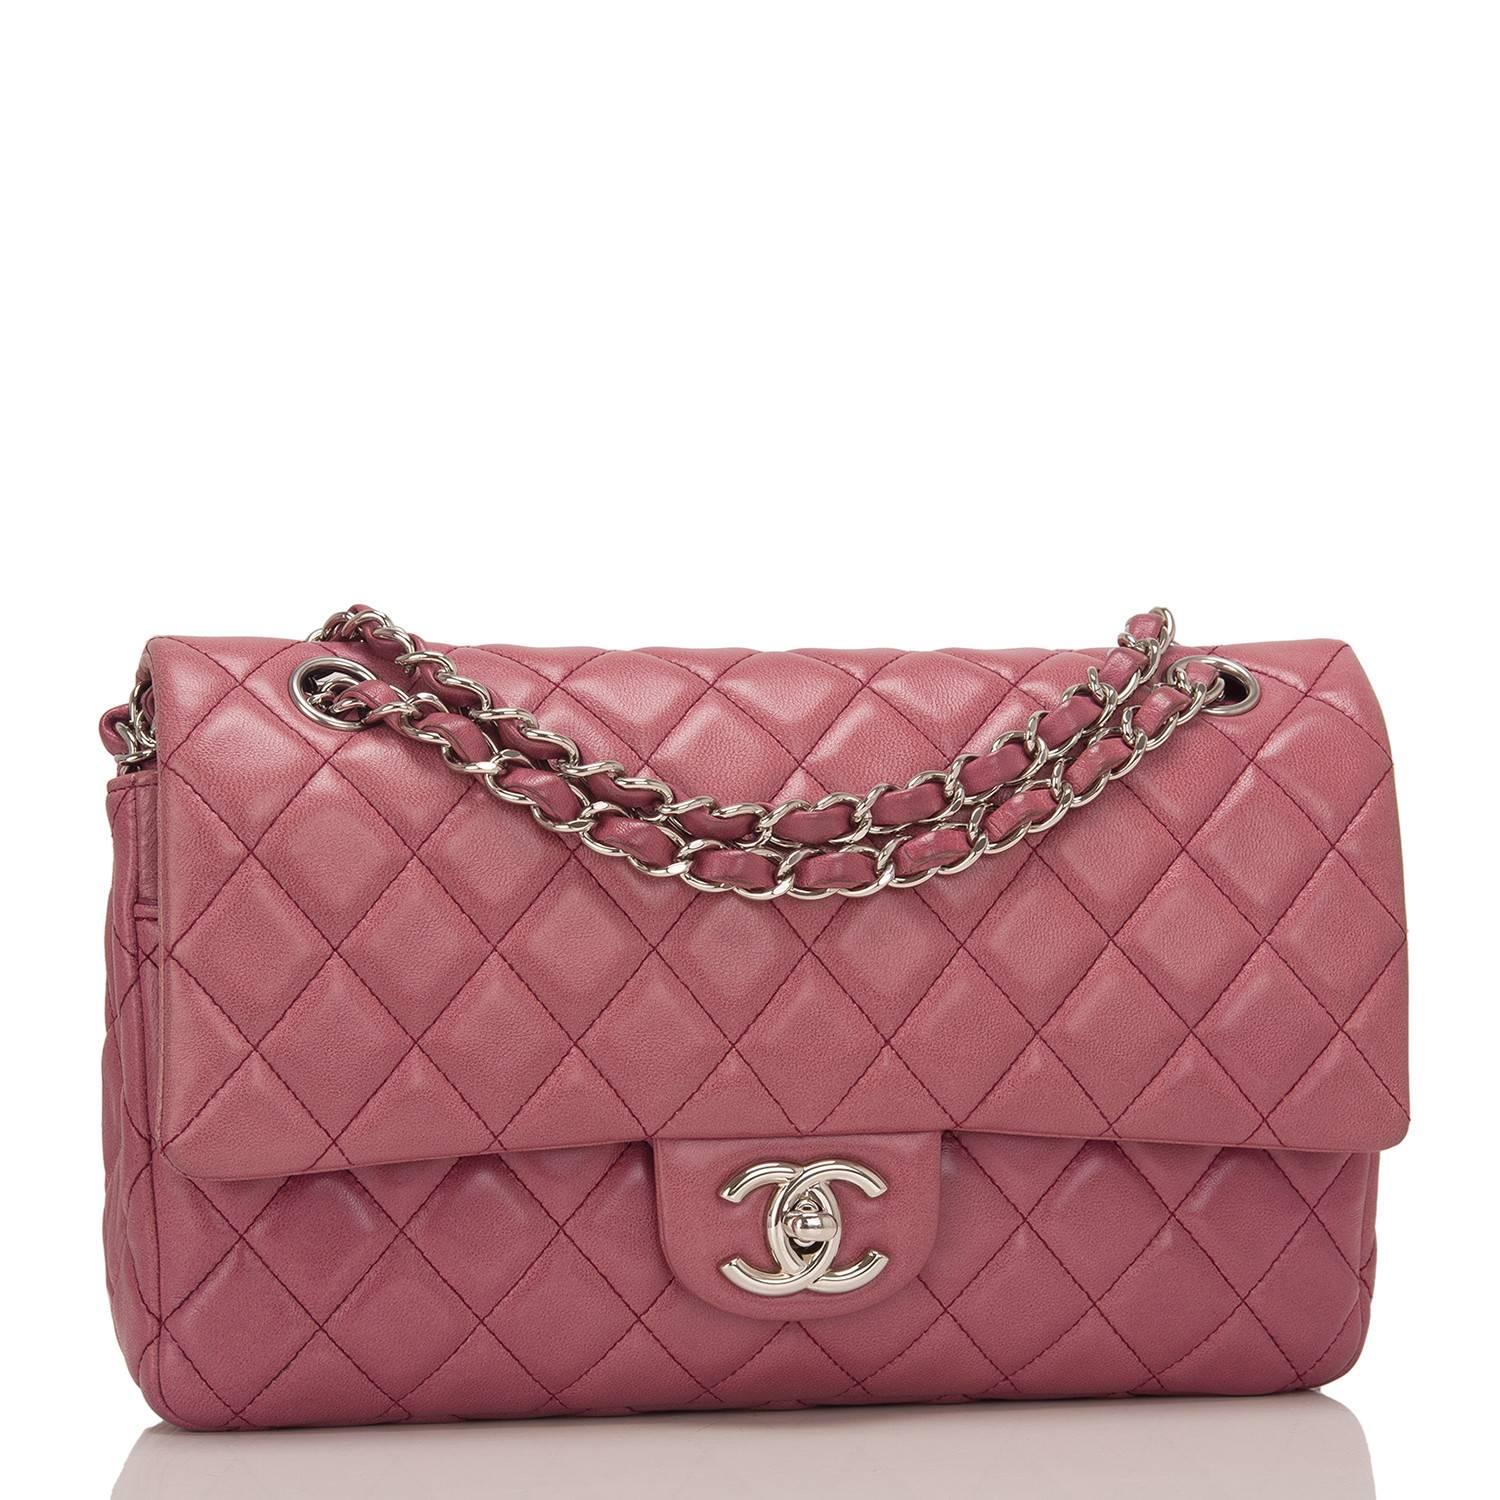 Chanel Medium Classic Double Flap bag of Rose Fonce (dark rose pink) quilted lambskin leather and silver tone hardware.

The bag features a front flap with signature CC turnlock closure, a half moon back pocket and an adjustable interwoven silver